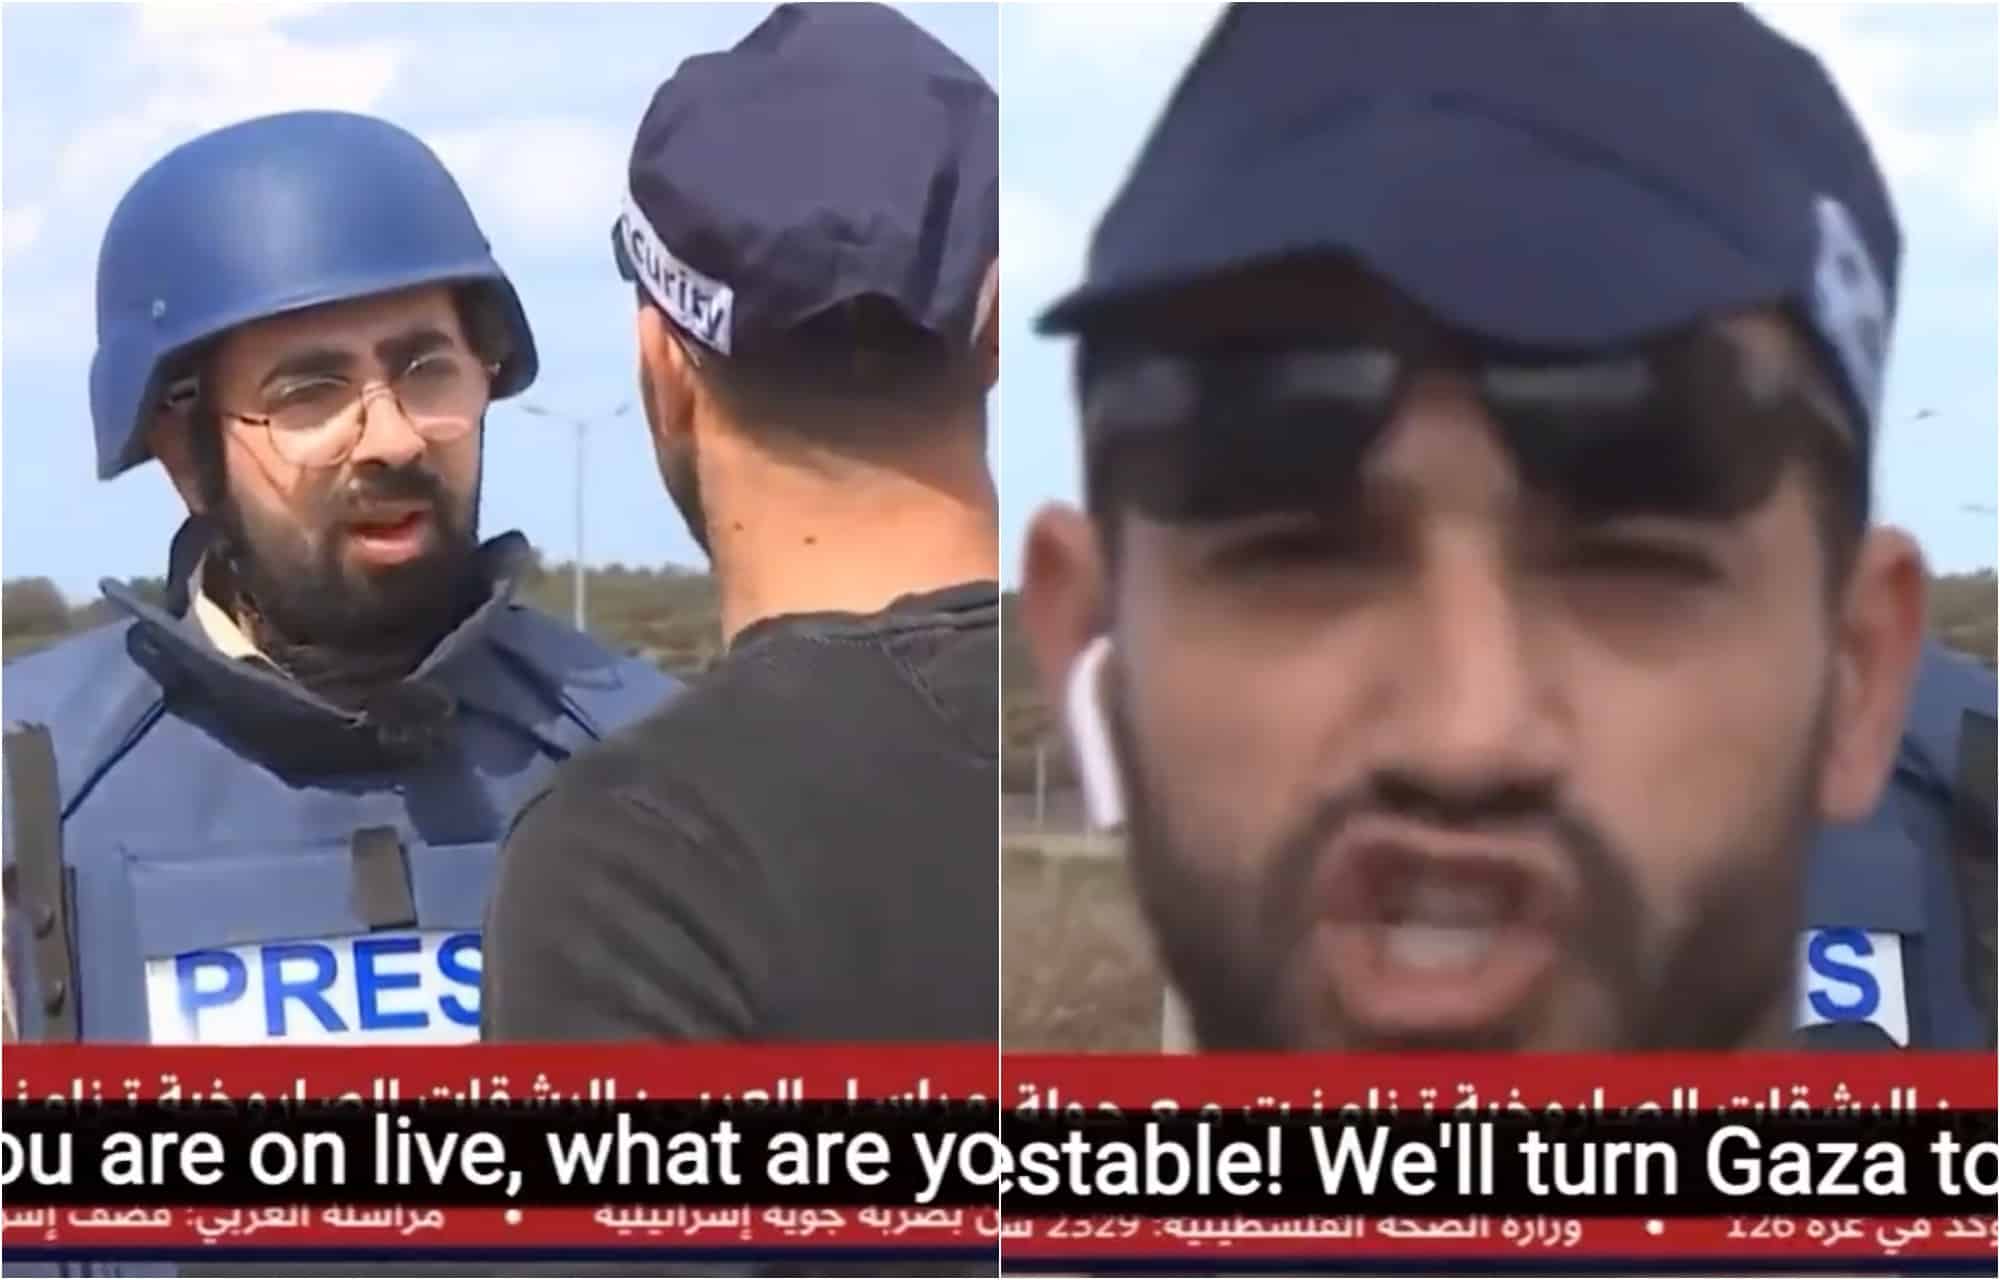 ‘We will turn Gaza to dust!’: Qatari journalist threatened live on air by Israeli security officer